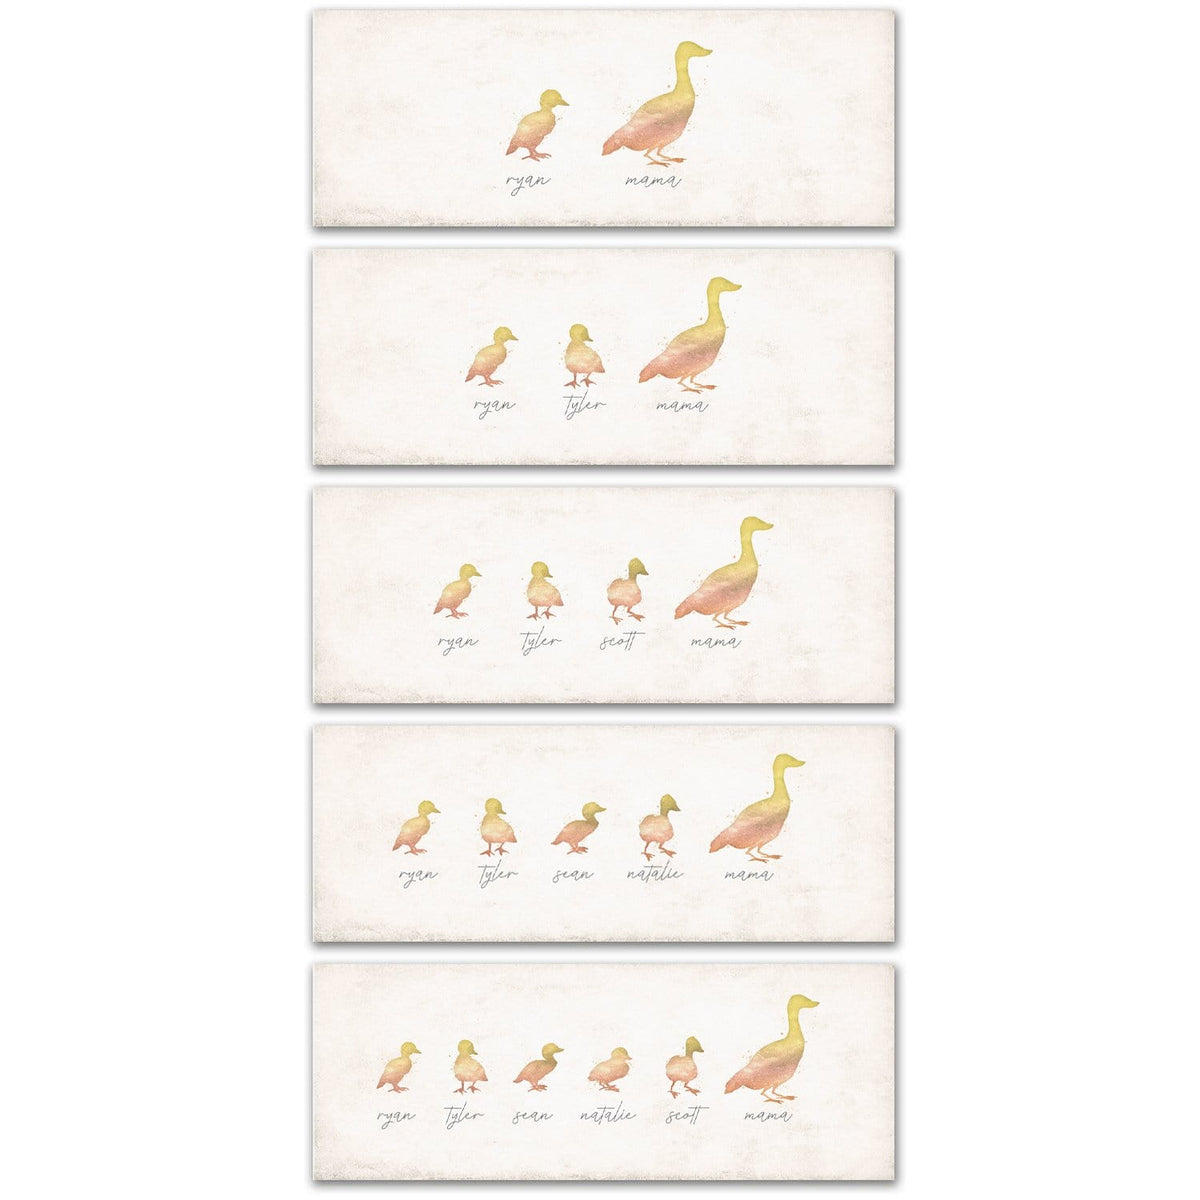 Personalized with names and 1-5 ducklings